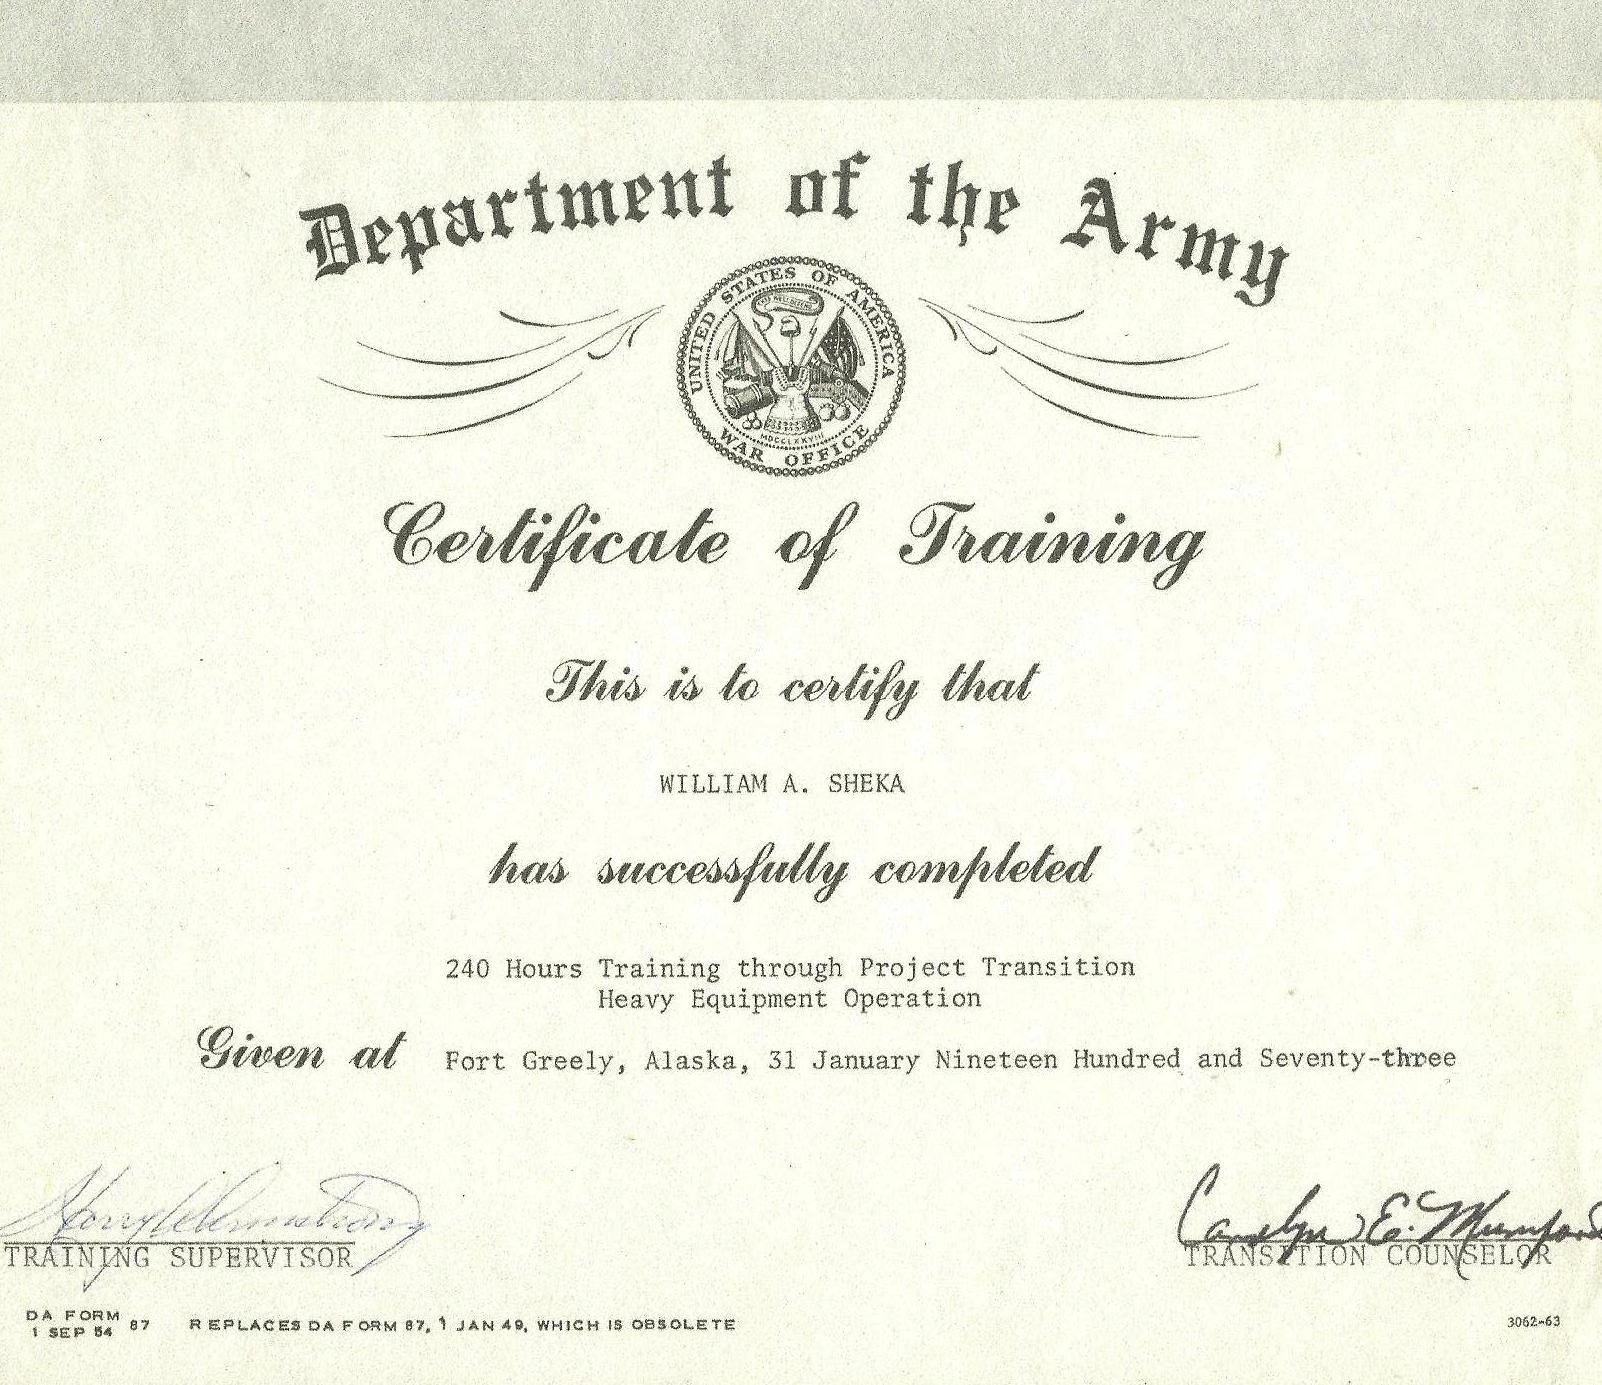 dept-of-us-army-certificate-of-training-240-hours-of-heavy-equipement-operator-31-jn-1973-signed-by-harry-armstrong